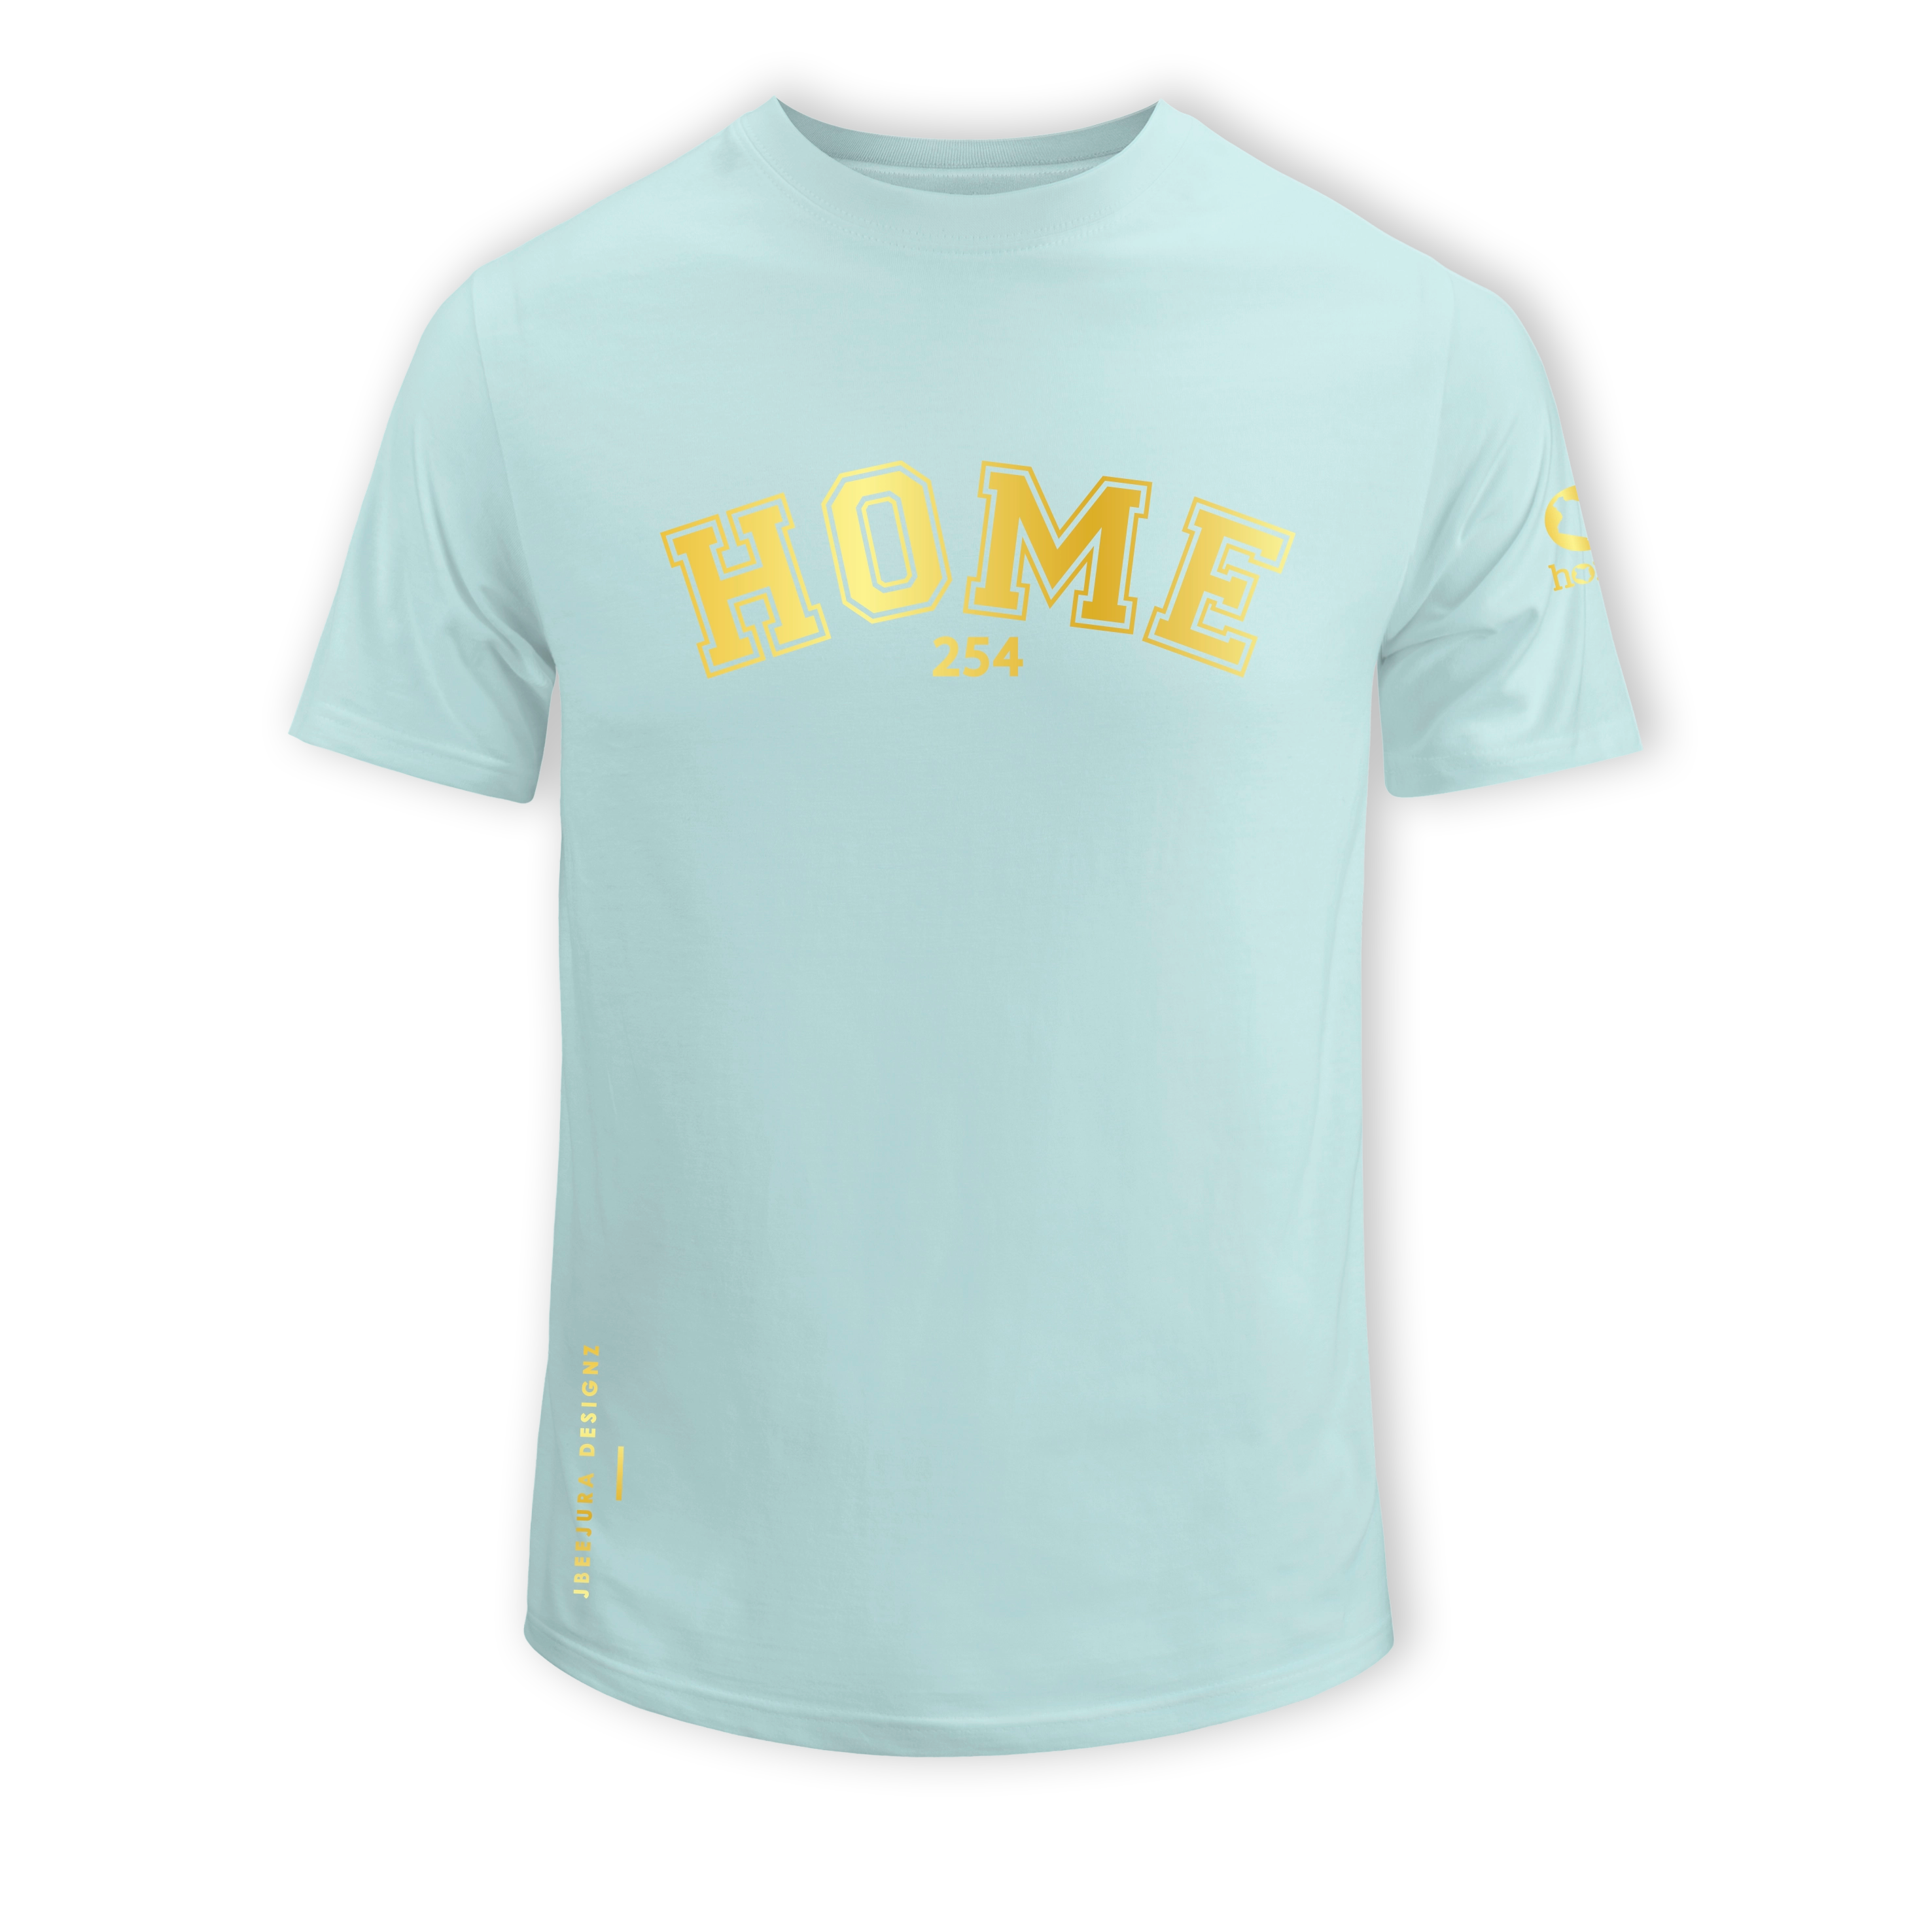 home_254 SHORT-SLEEVED MISTY BLUE T-SHIRT WITH A GOLD COLLEGE PRINT – COTTON PLUS FABRIC